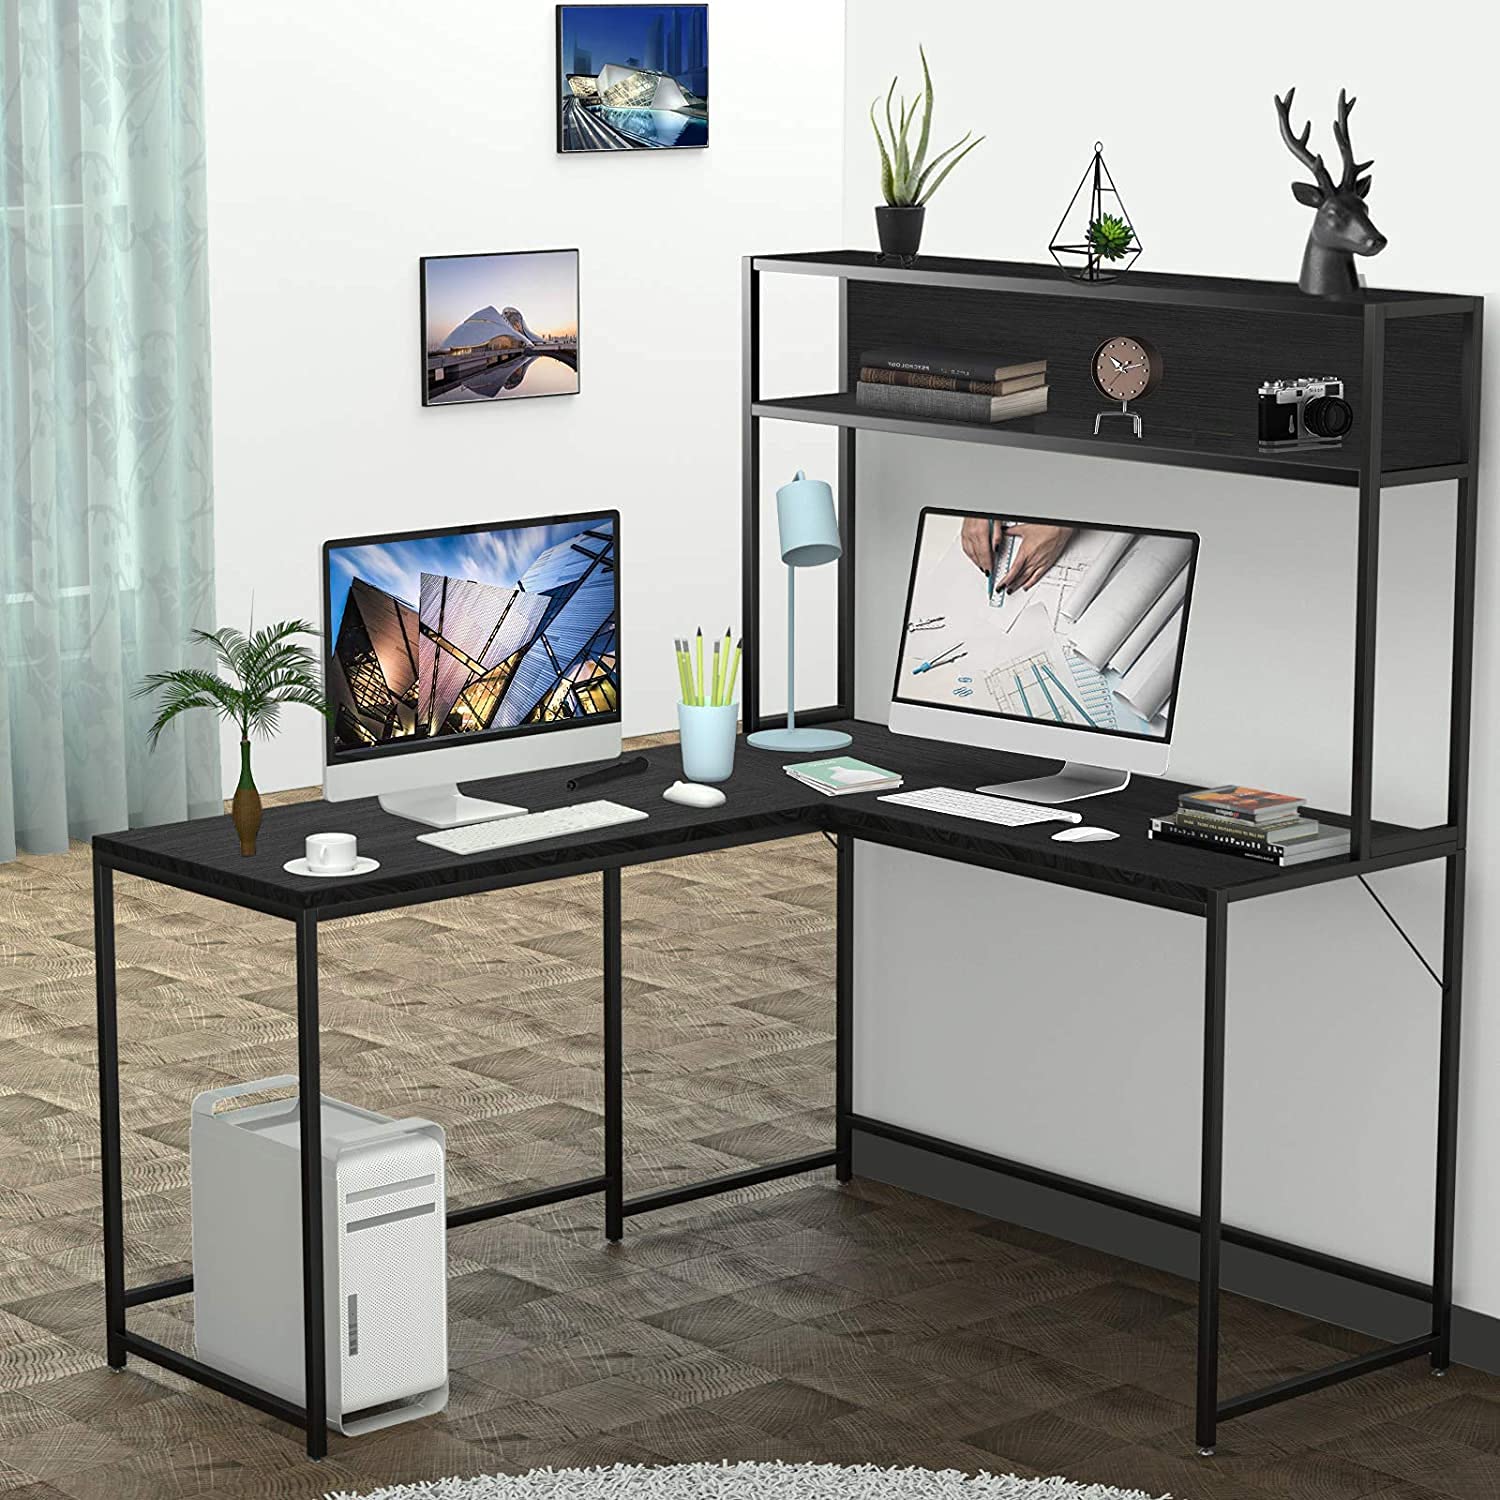 Qcen L-Shaped computer Desk with Hutch, corner Desk for Home Office, Writing Study Desk with Storage Shelves, 55 inch Large Pc g